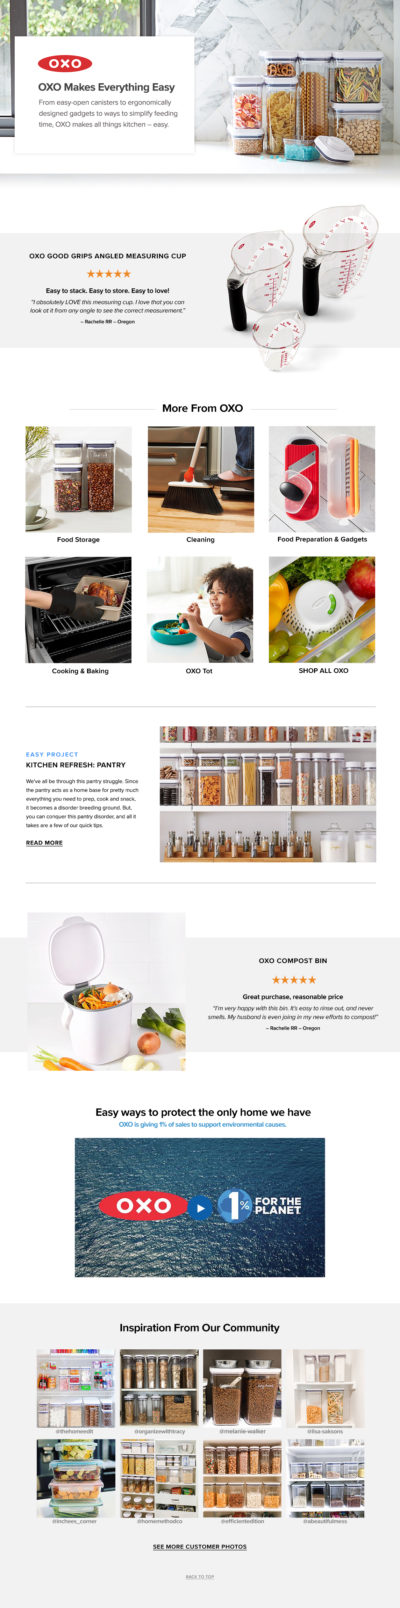 OXO Landing Page